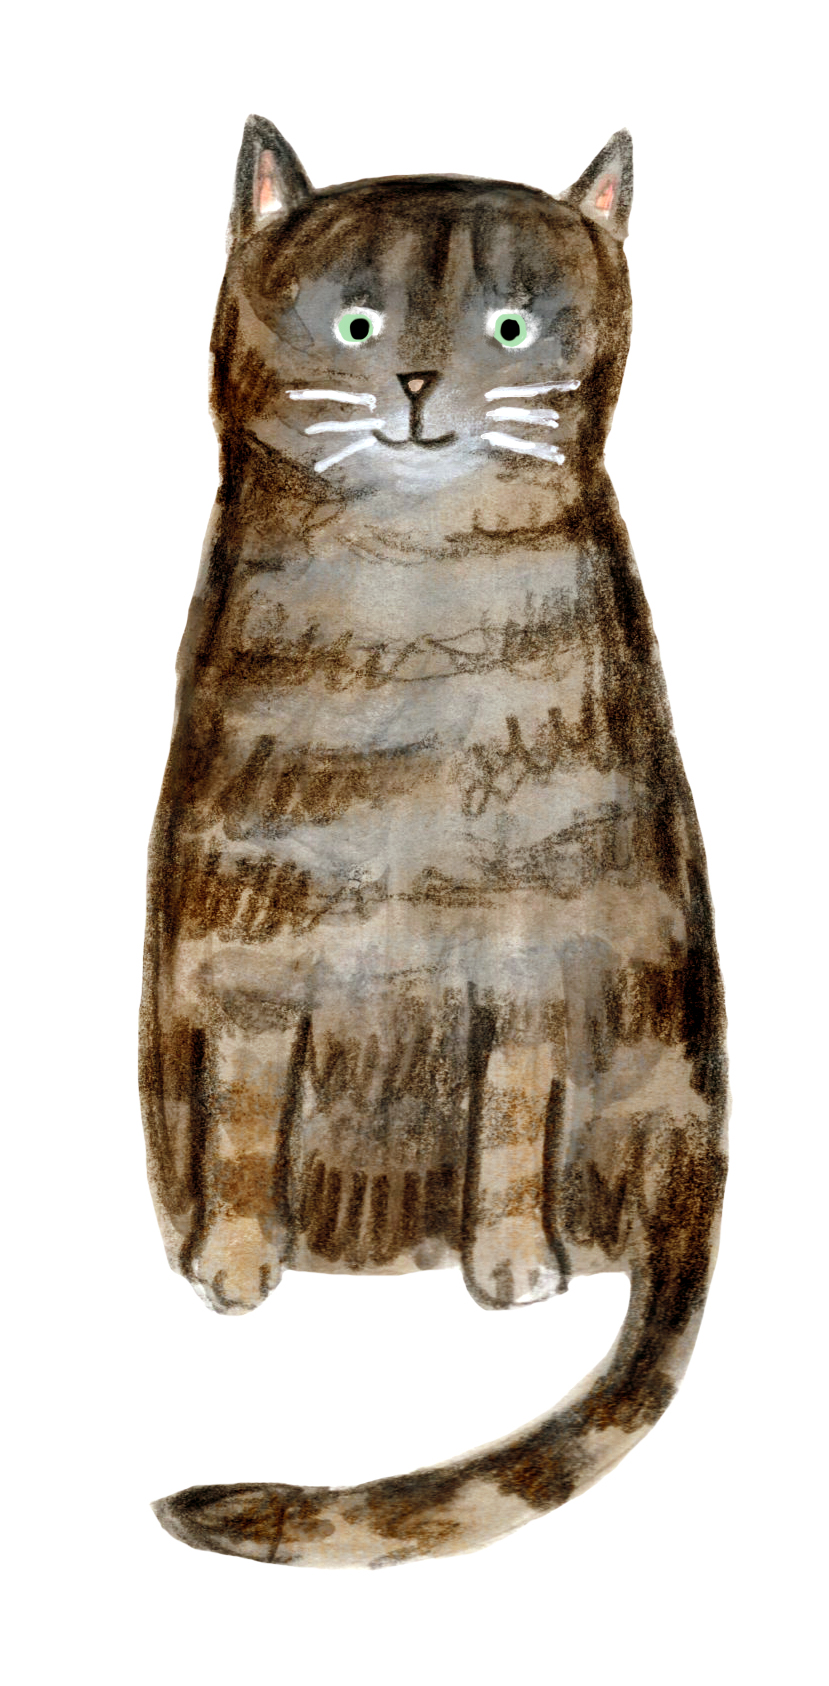 Bertie, a grey and brown cat illustration